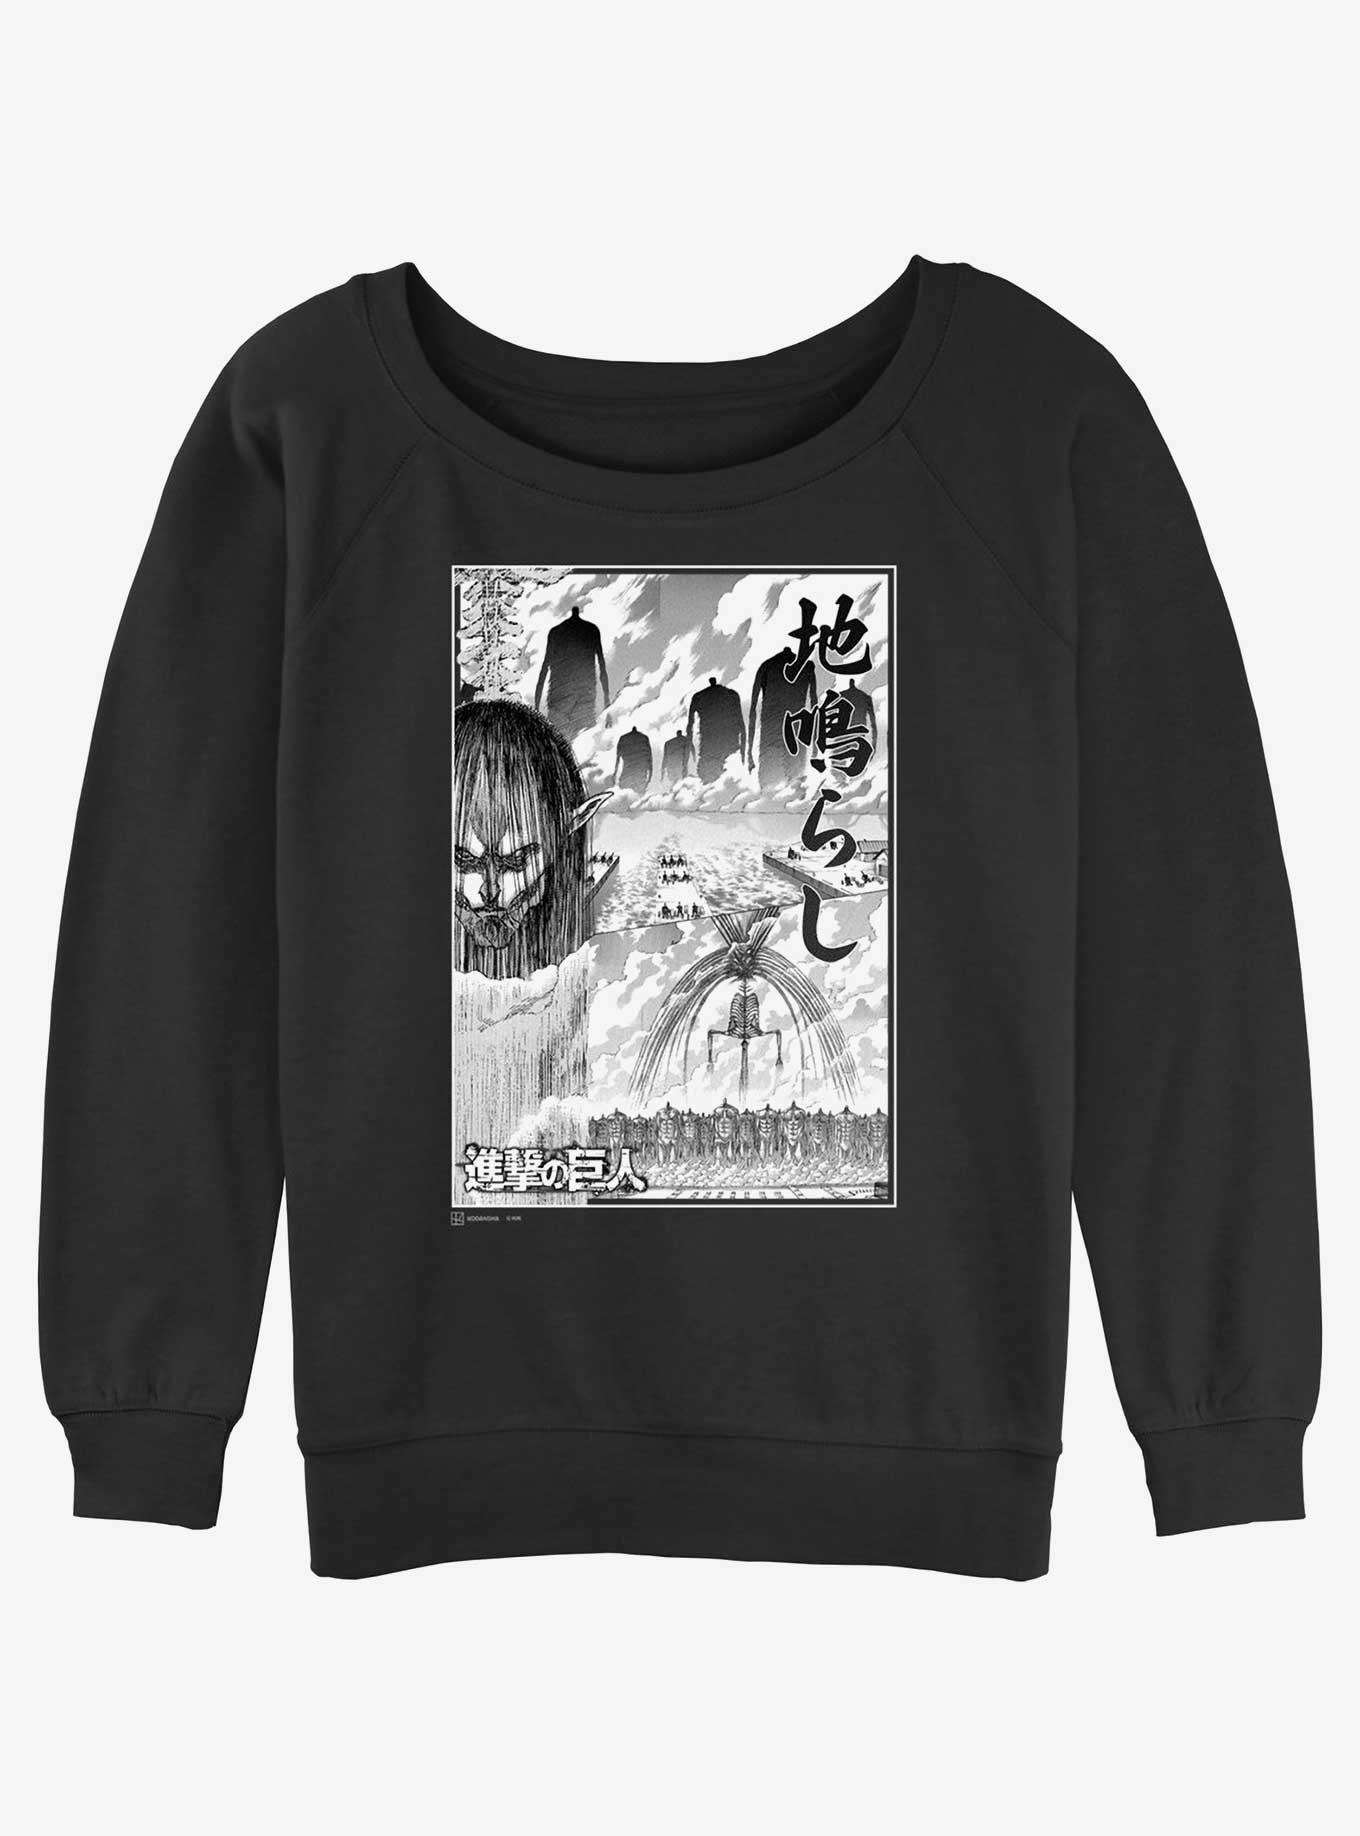 Attack on Titan The Rumbling Poster Girls Slouchy Sweatshirt